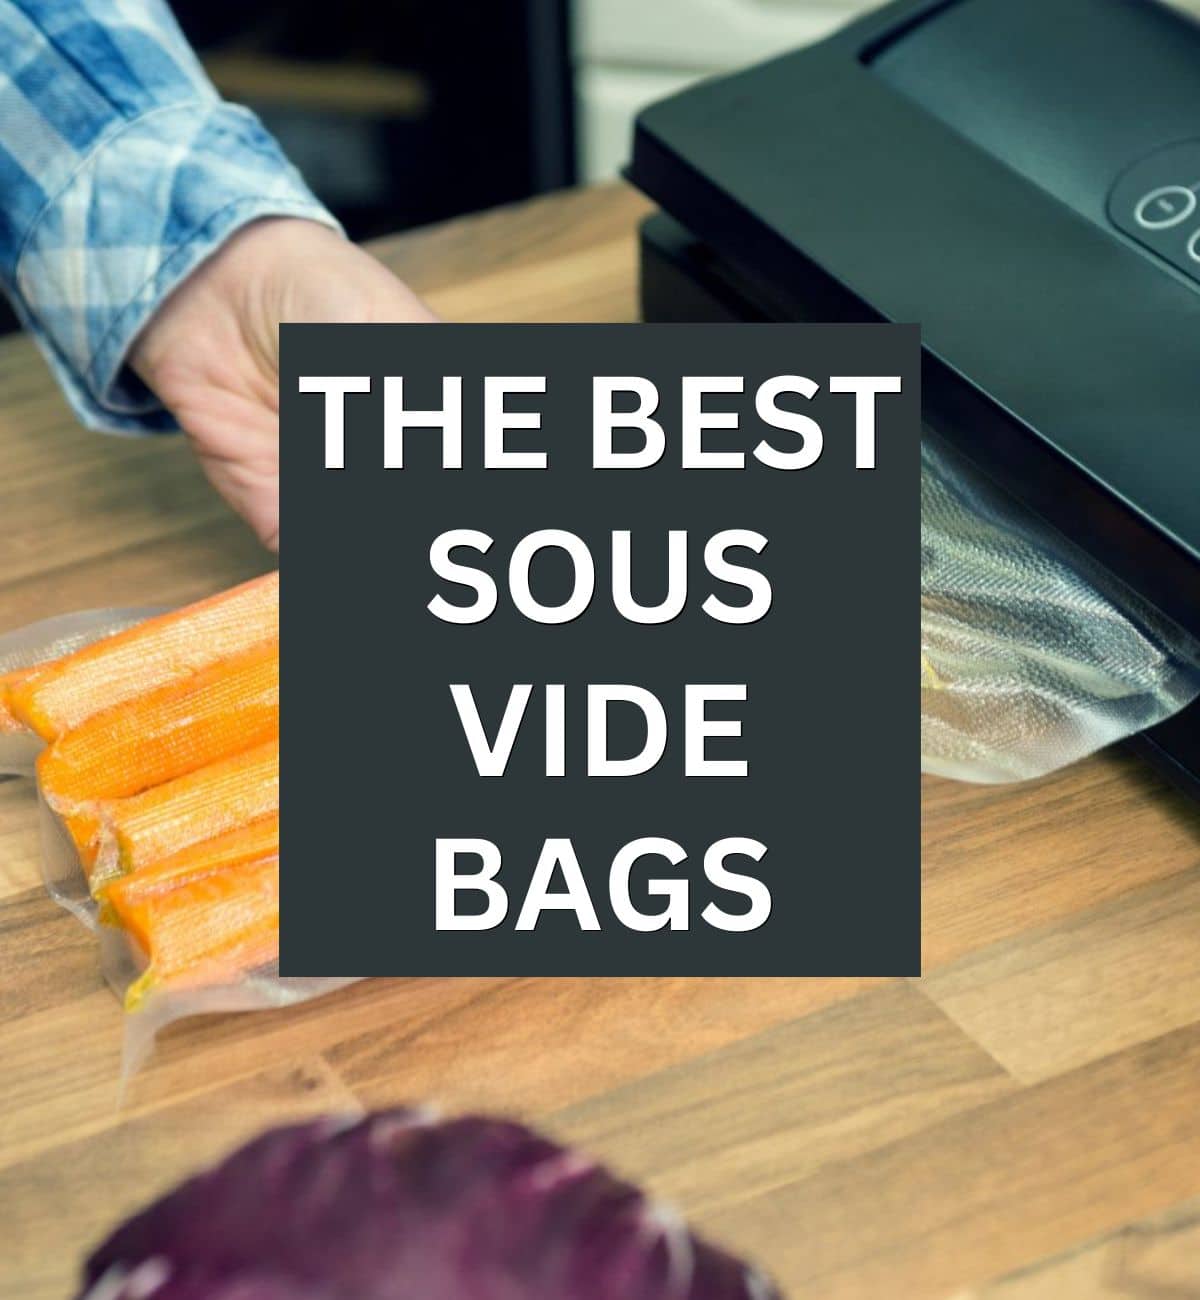 https://www.wenthere8this.com/wp-content/uploads/2023/07/The-Best-Sous-Vide-Bags.jpg